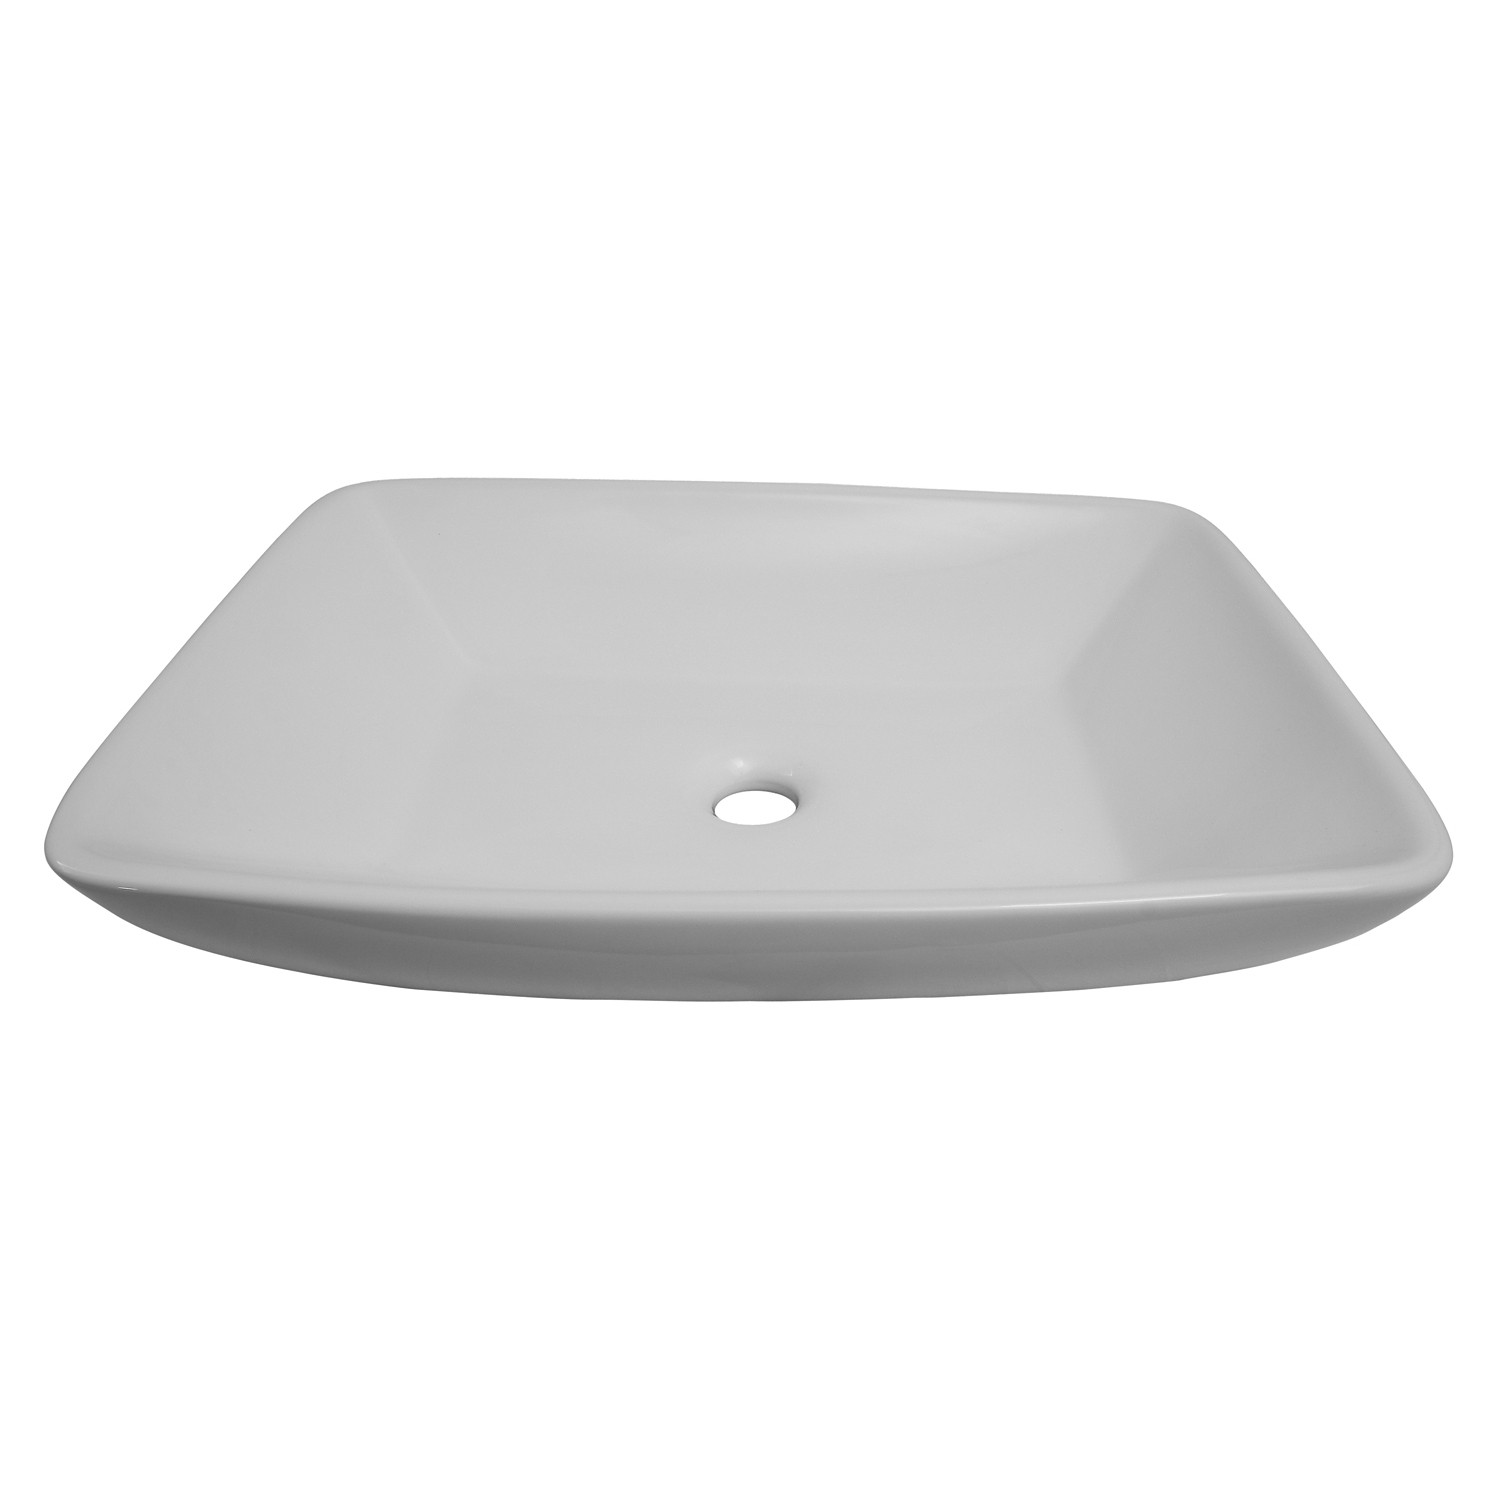 BARCLAY 4-439WH CARLOS 23 1/2 INCH SINGLE BASIN ABOVE COUNTER BATHROOM SINK - WHITE